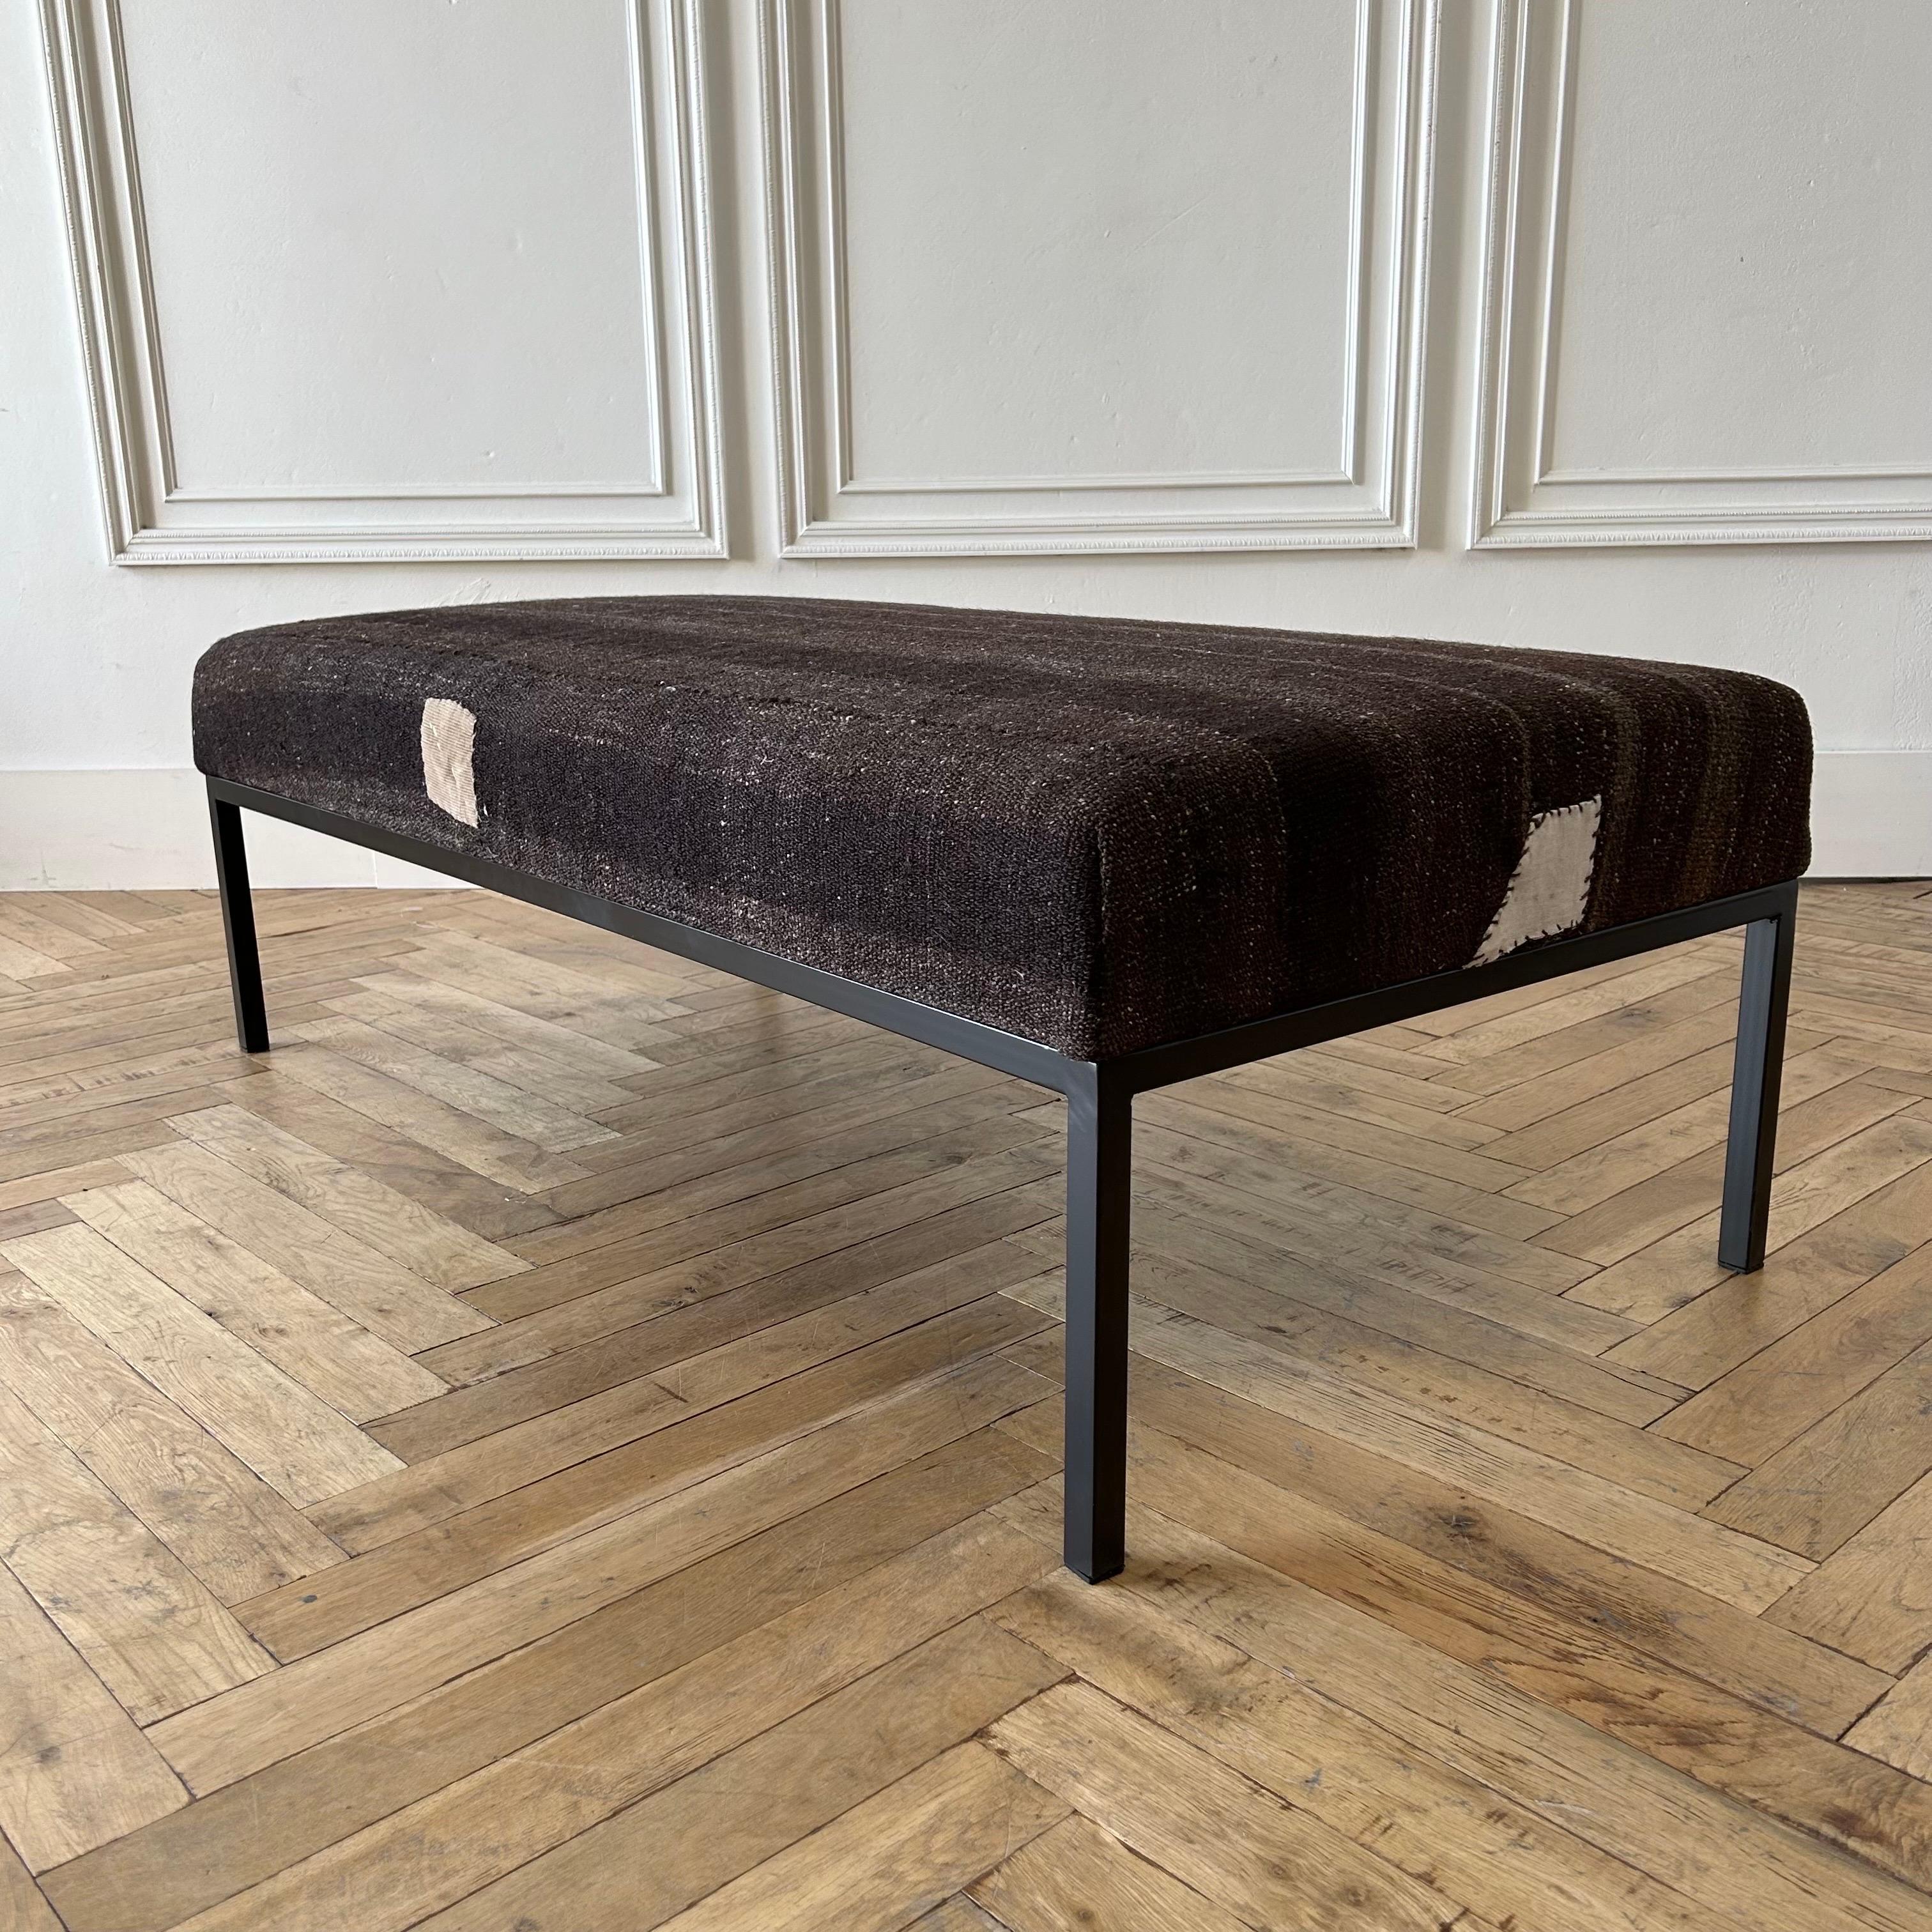 Custom made bench ottoman by Bloom Home Inc.
Size: 56”w x 28”d x 18”h
Custom made metal base, and powder coated in a dark iron bronze finish.
The upholstered top is from an antique or vintage Turkish rug.

Color: brown/coco/taupe/original beige